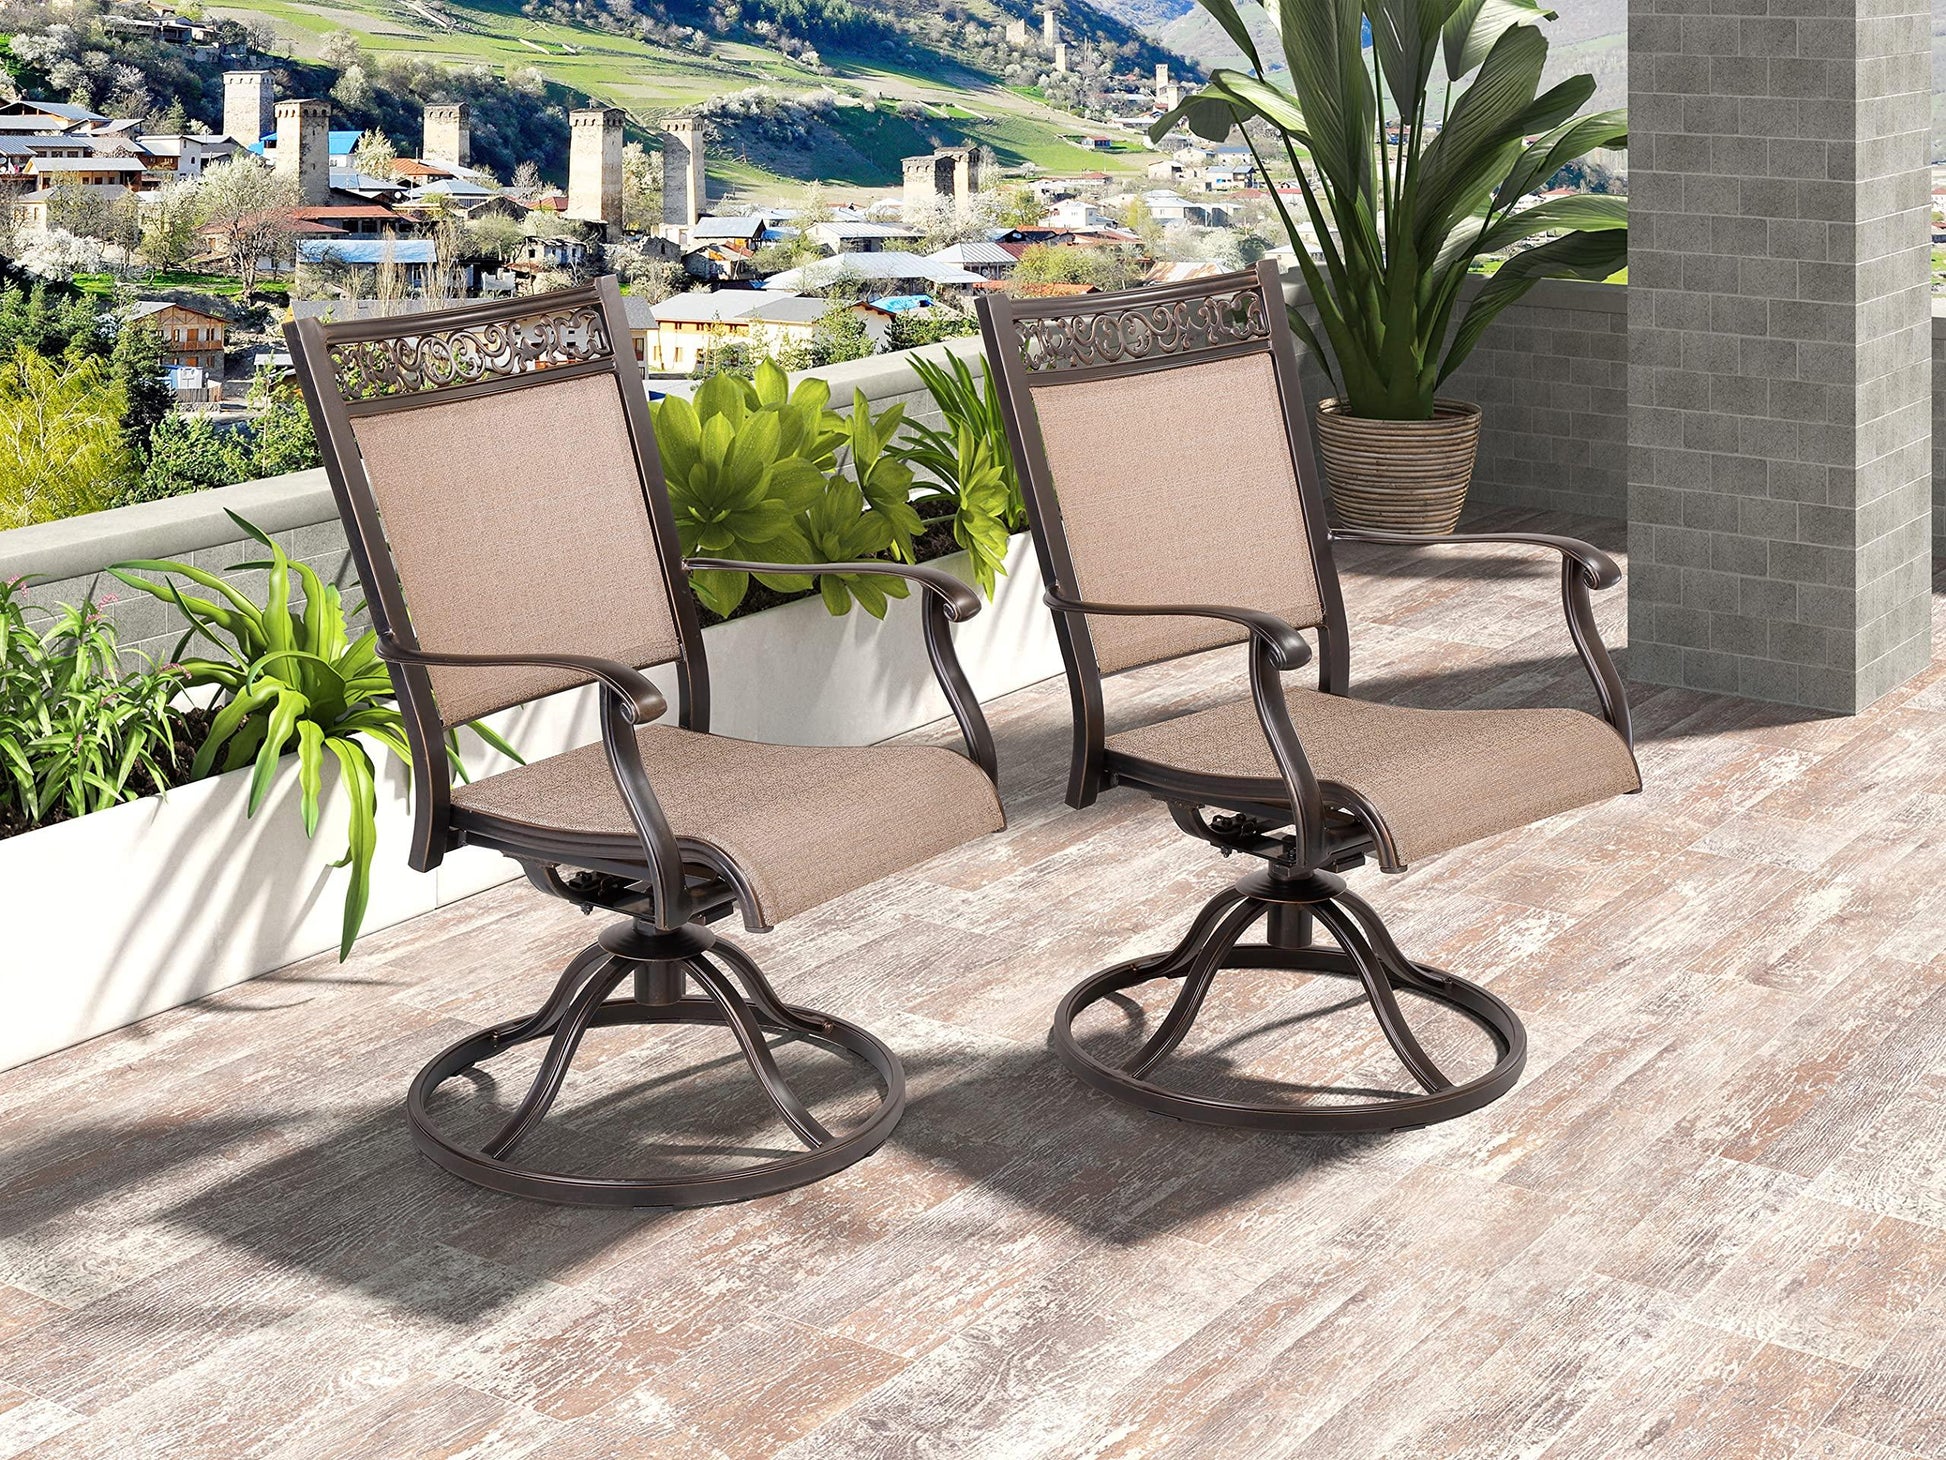 Casual World Patio Sling Dining Chairs Set of 2, Outdoor Furniture Swivel Rocker Chairs with All-Weather Aluminum Frame for Bistro Garden Backyard Balcony - CookCave